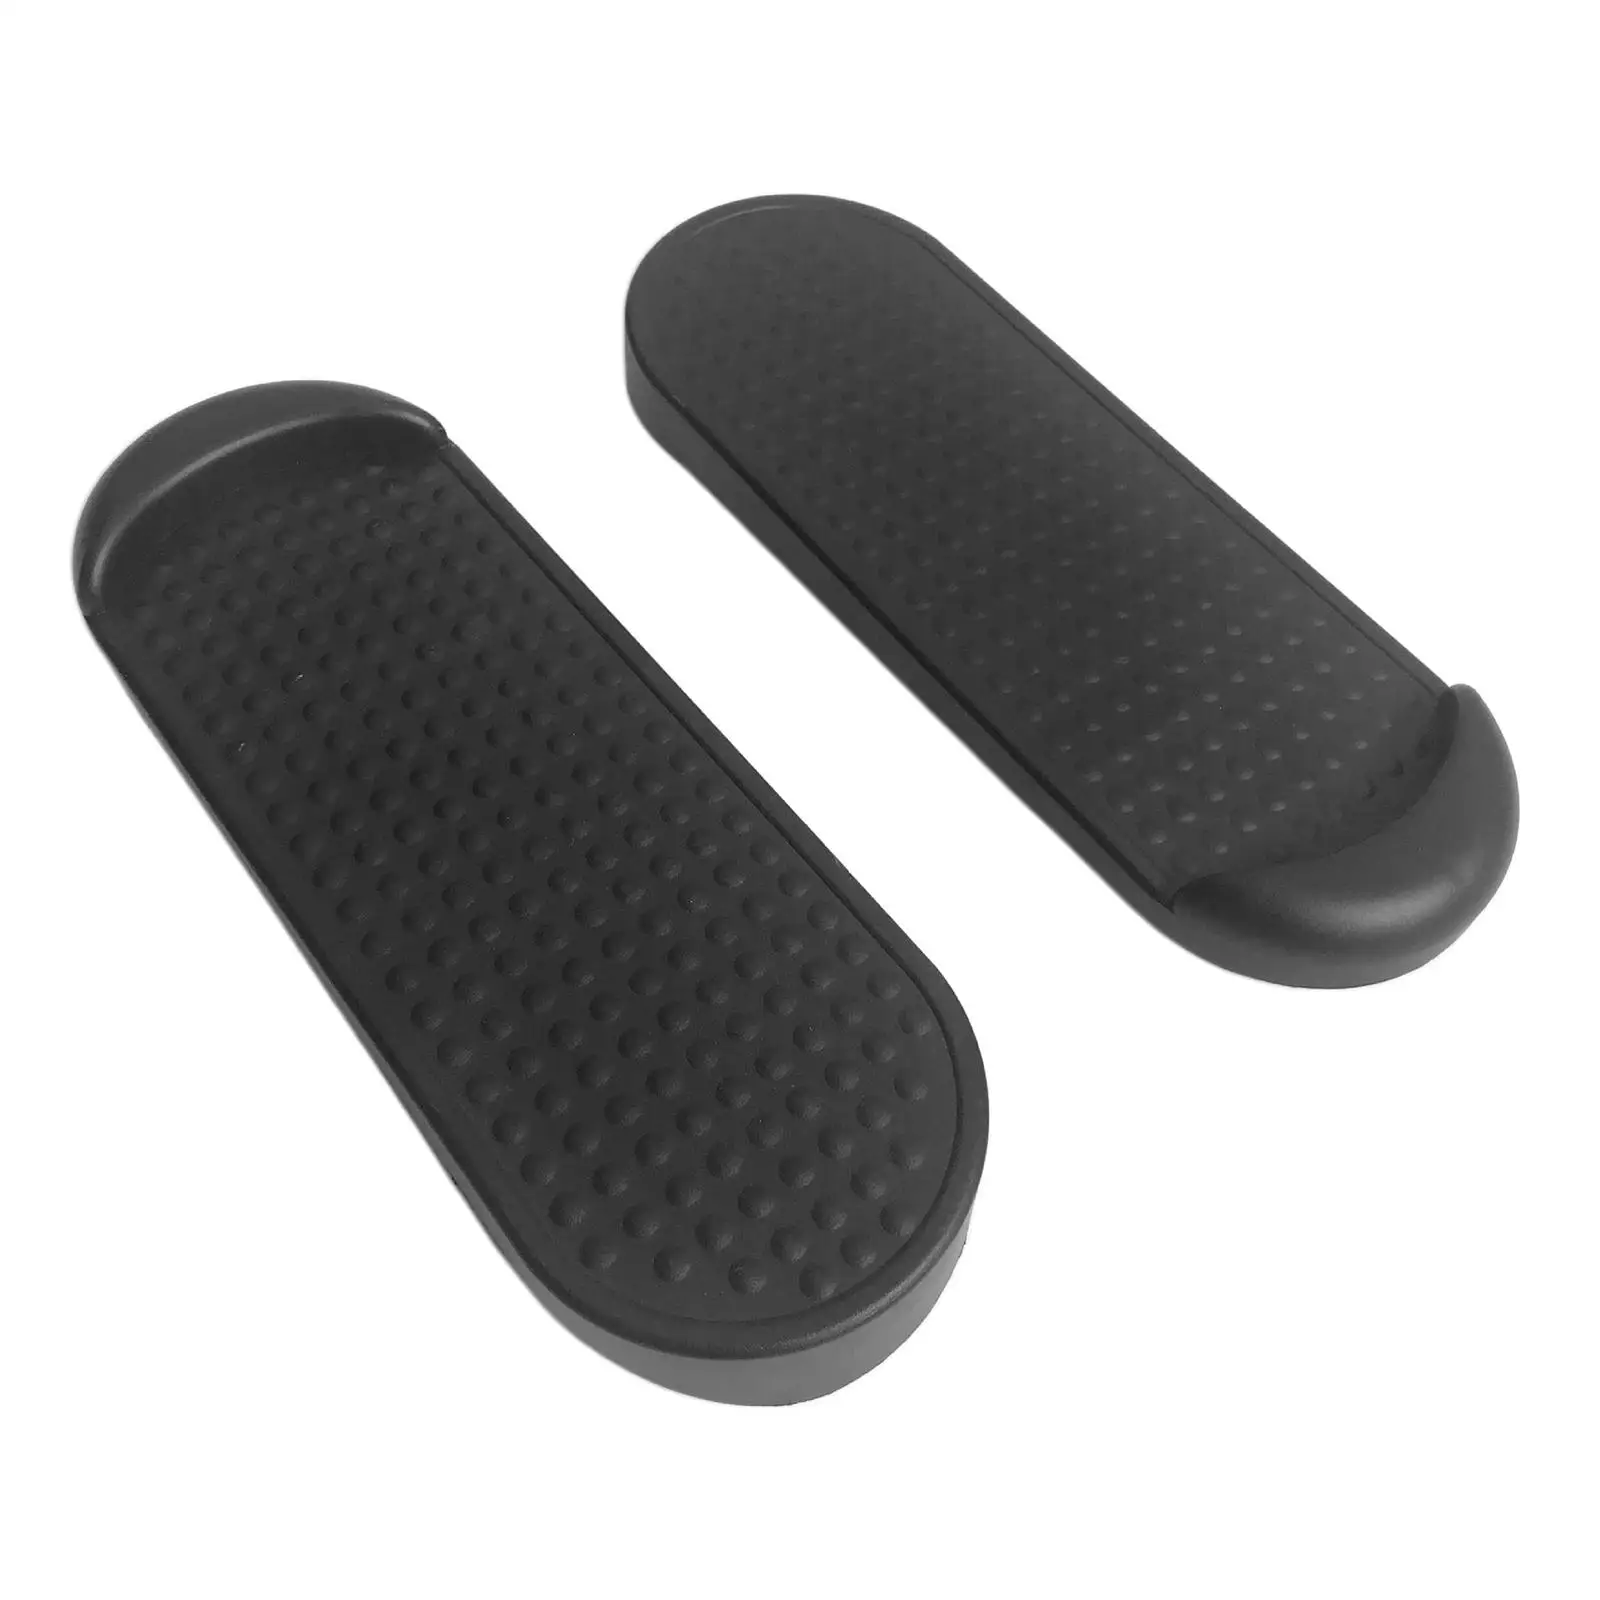 2Pcs Under Desk Elliptical Foot Pedals Nonslip Pad Household Fitness Stair